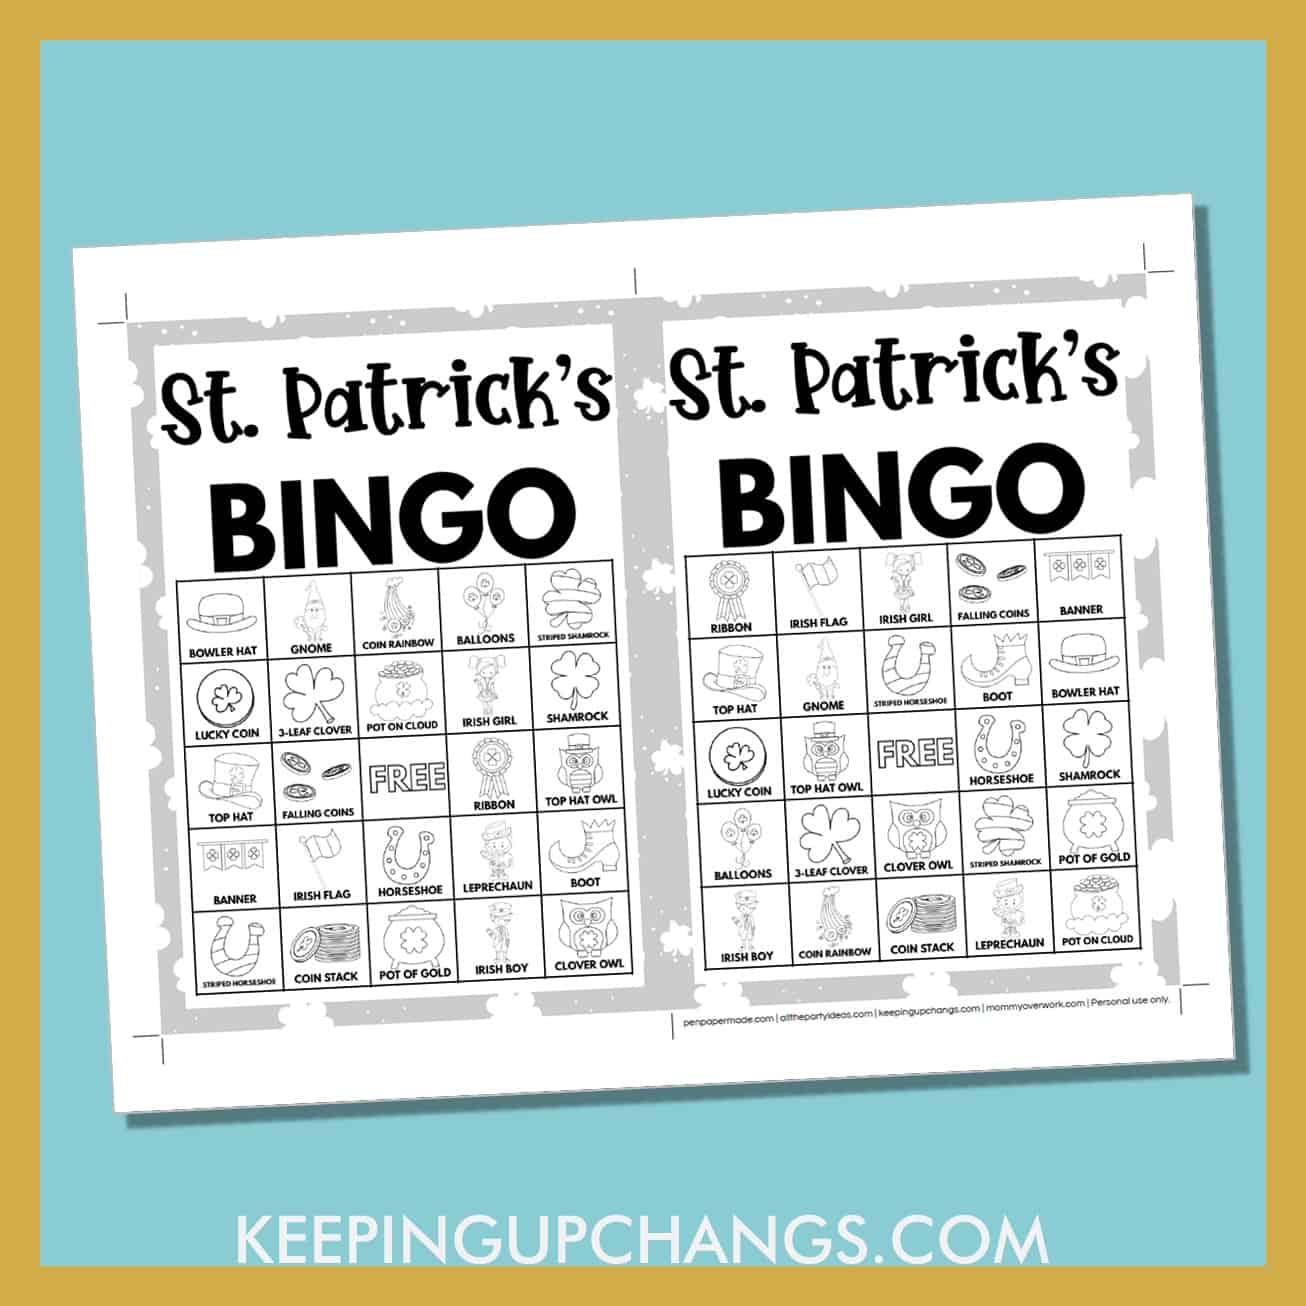 free st patrick's day bingo card 5x5 5x7 black white coloring game boards with images and text words.